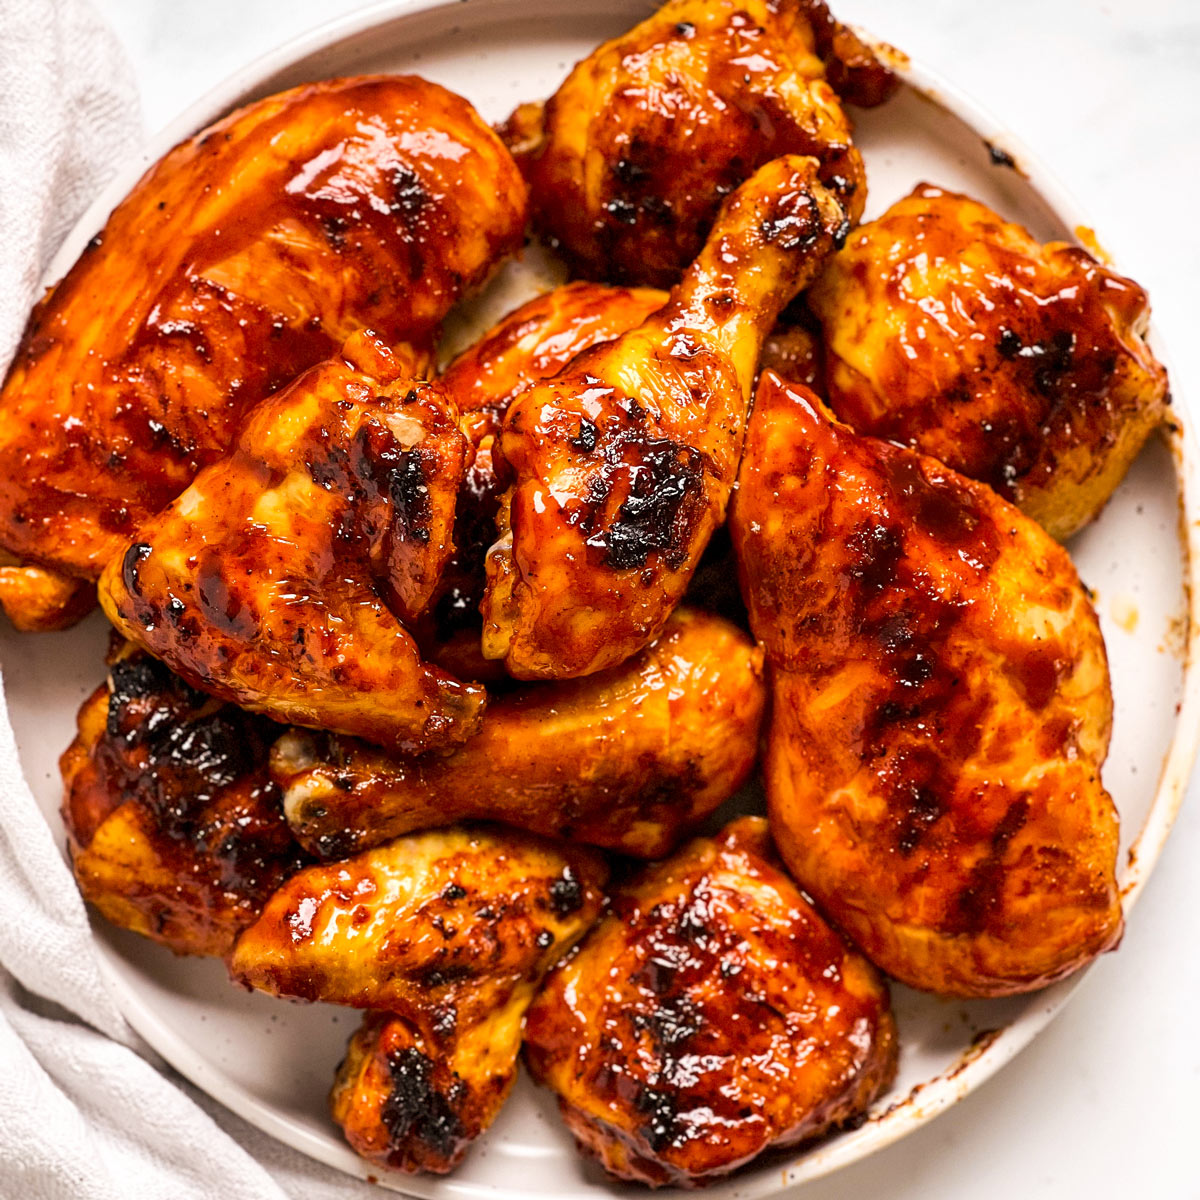 The Best BBQ Chicken Nothings Recipe - Savory